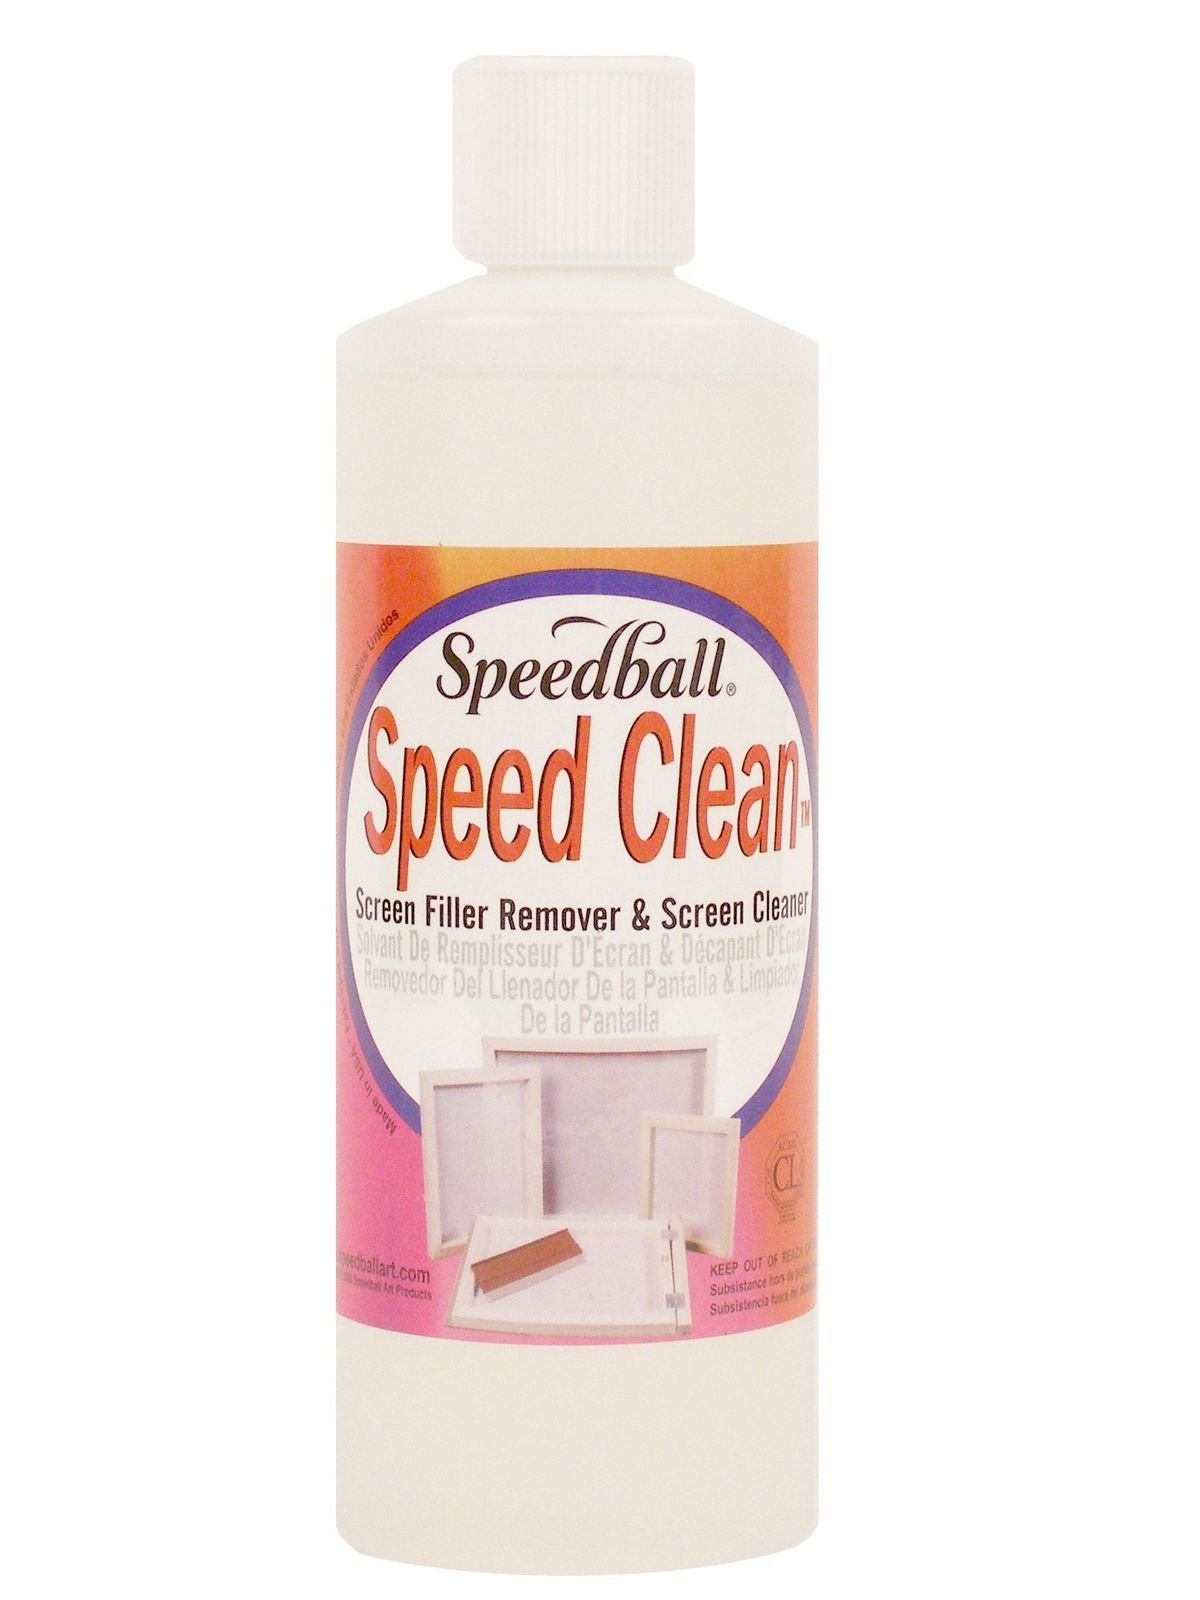 Speedball - Speed Clean Screen Filler Removal & Screen Cleaner